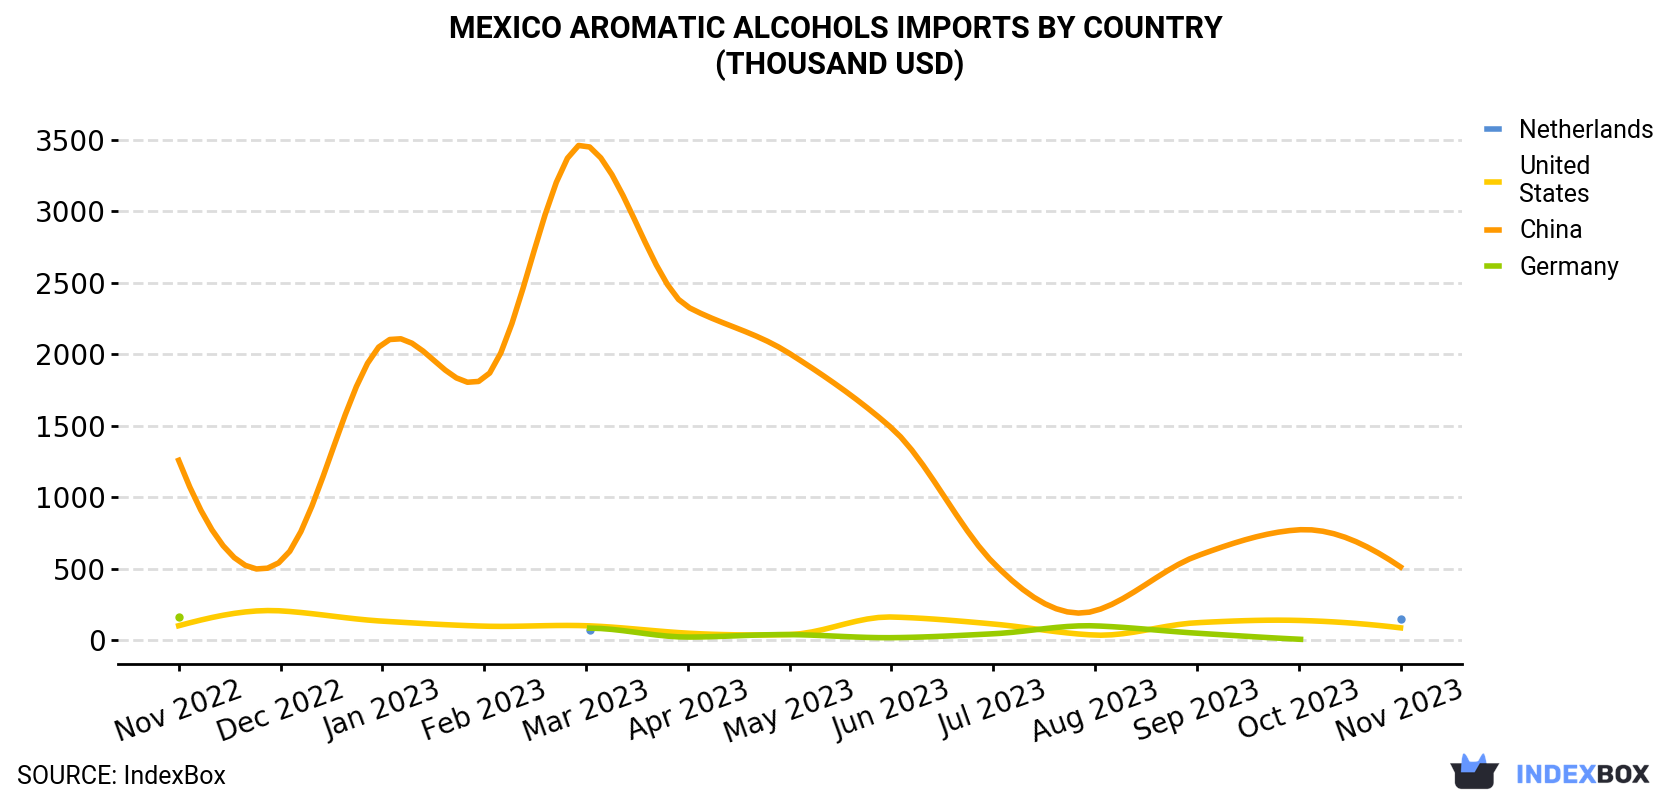 Mexico Aromatic Alcohols Imports By Country (Thousand USD)